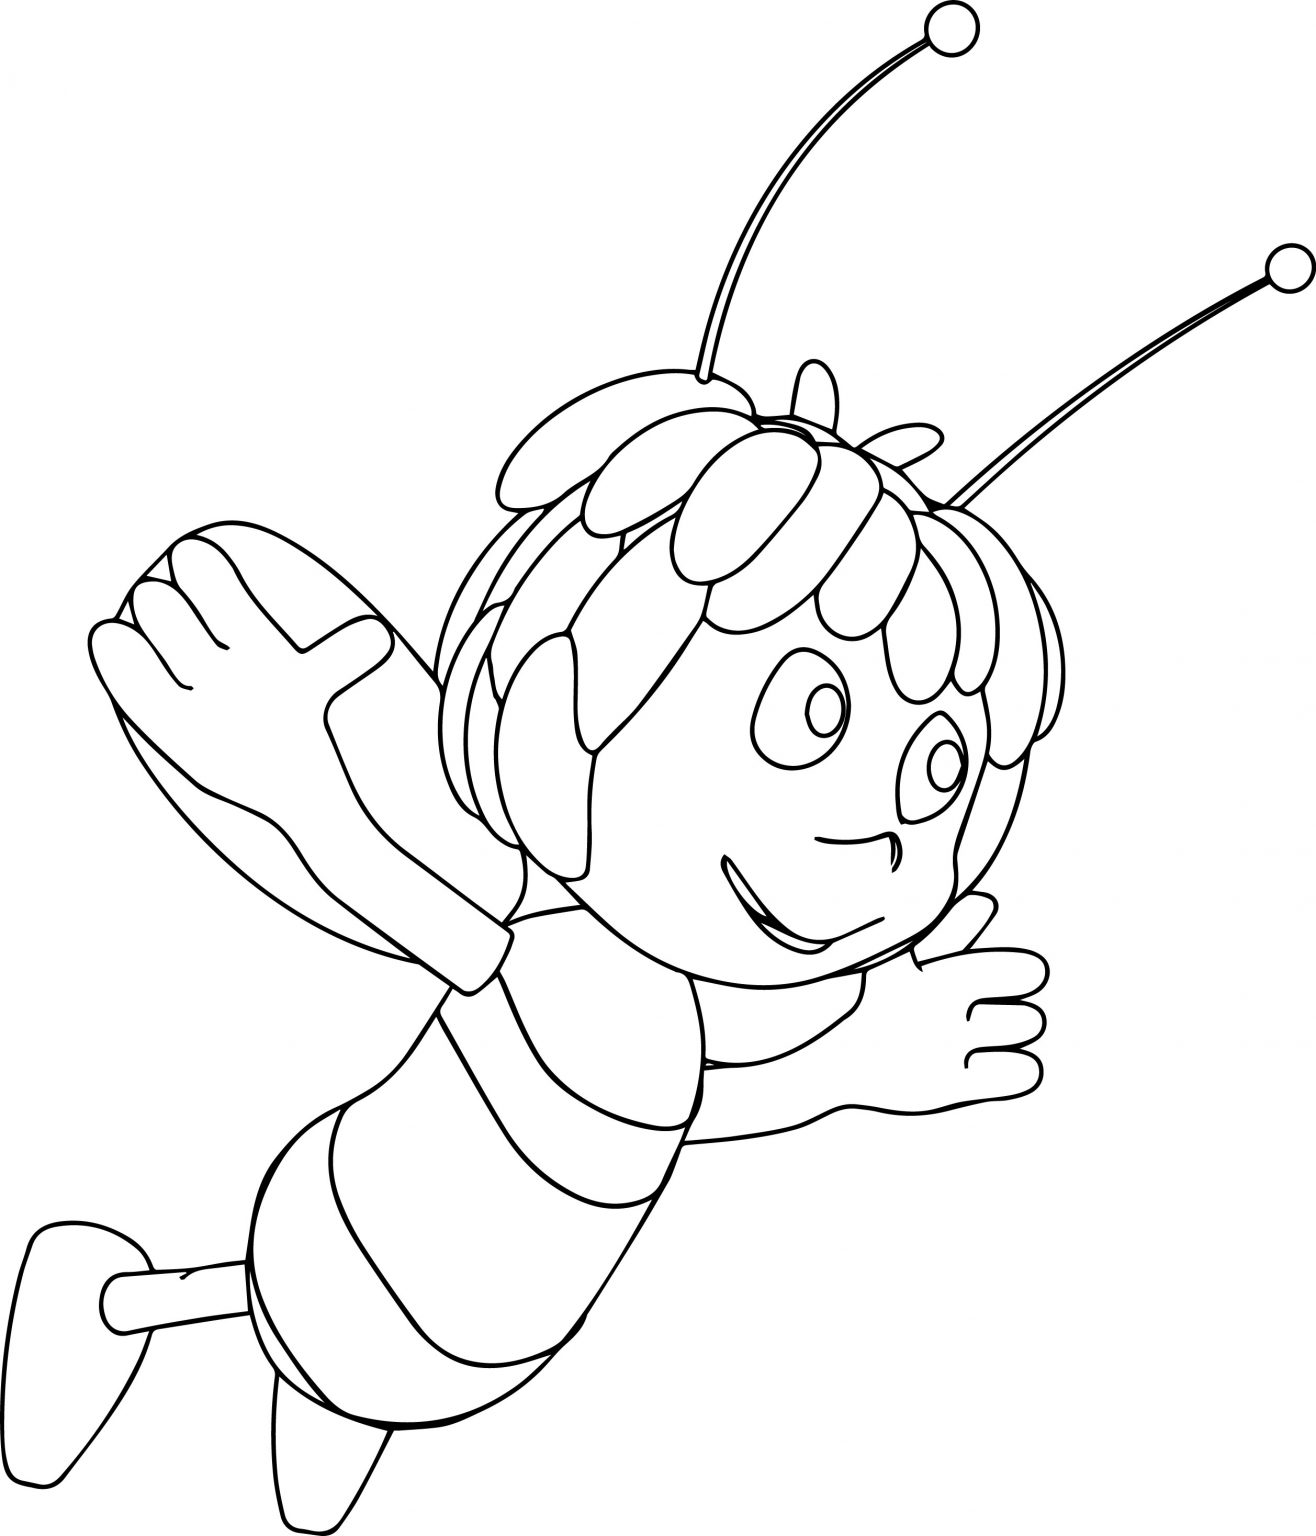 Charlie Brown And Snoopy Coloring Page - Wecoloringpage.com